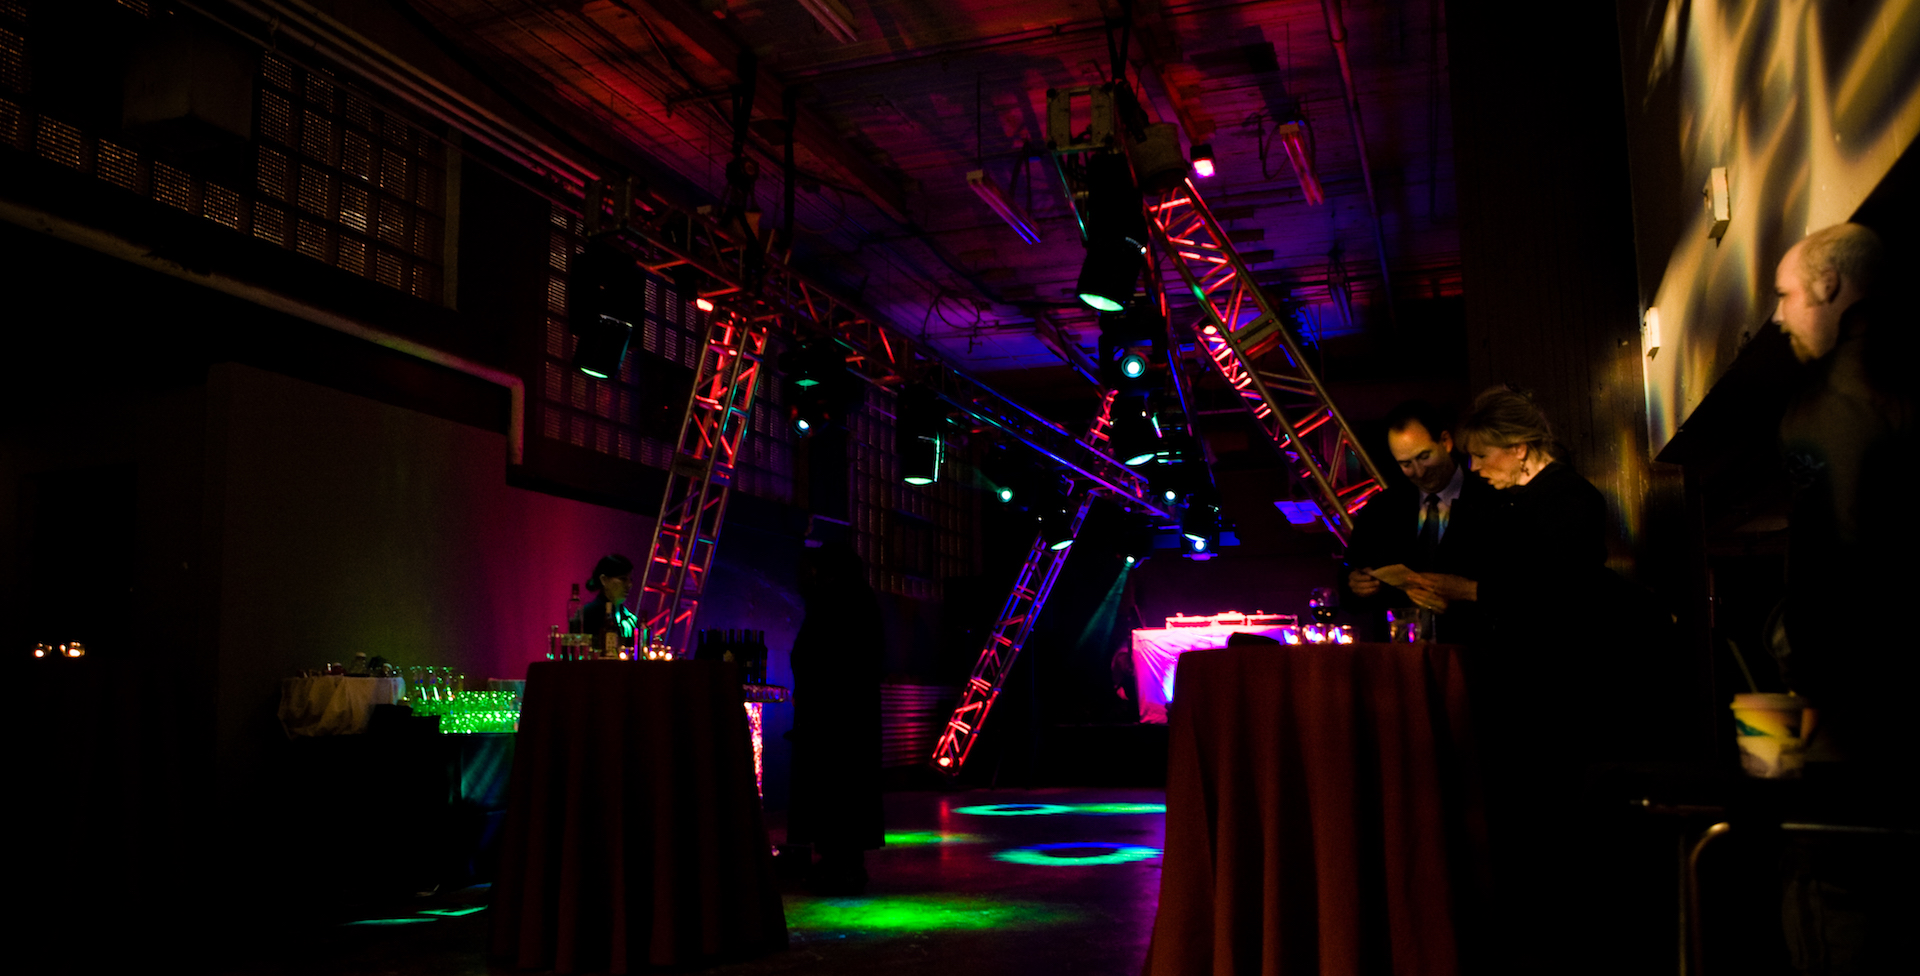 Truss sticks at odd angles and breakup gobos create a mysterious and exciting atmposphere for a corporate party